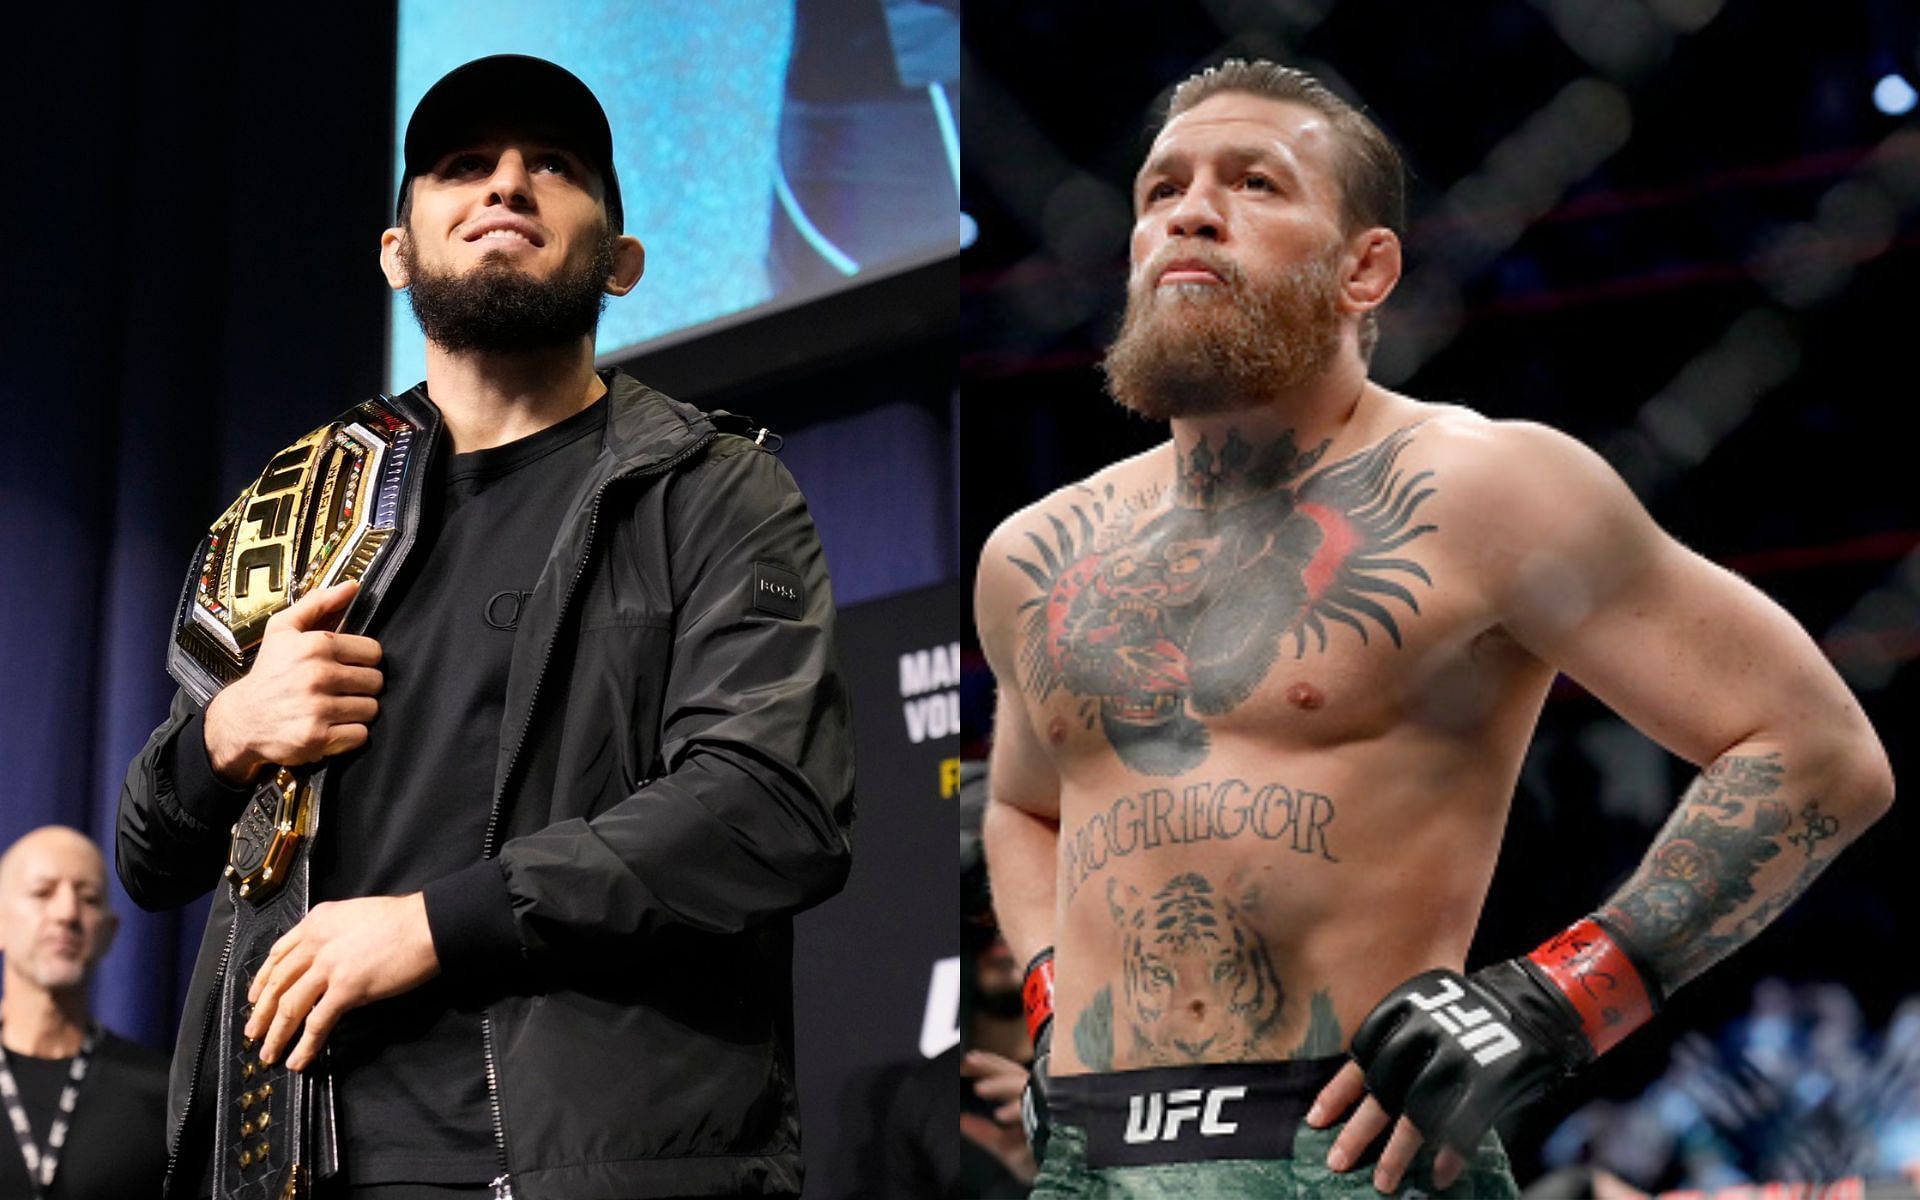 Daniel Cormier believes seeds are being planted for Islam Makhachev vs. Conor McGregor [Image credits: @MAKHACHEVMMA/Twitter, Getty Images]